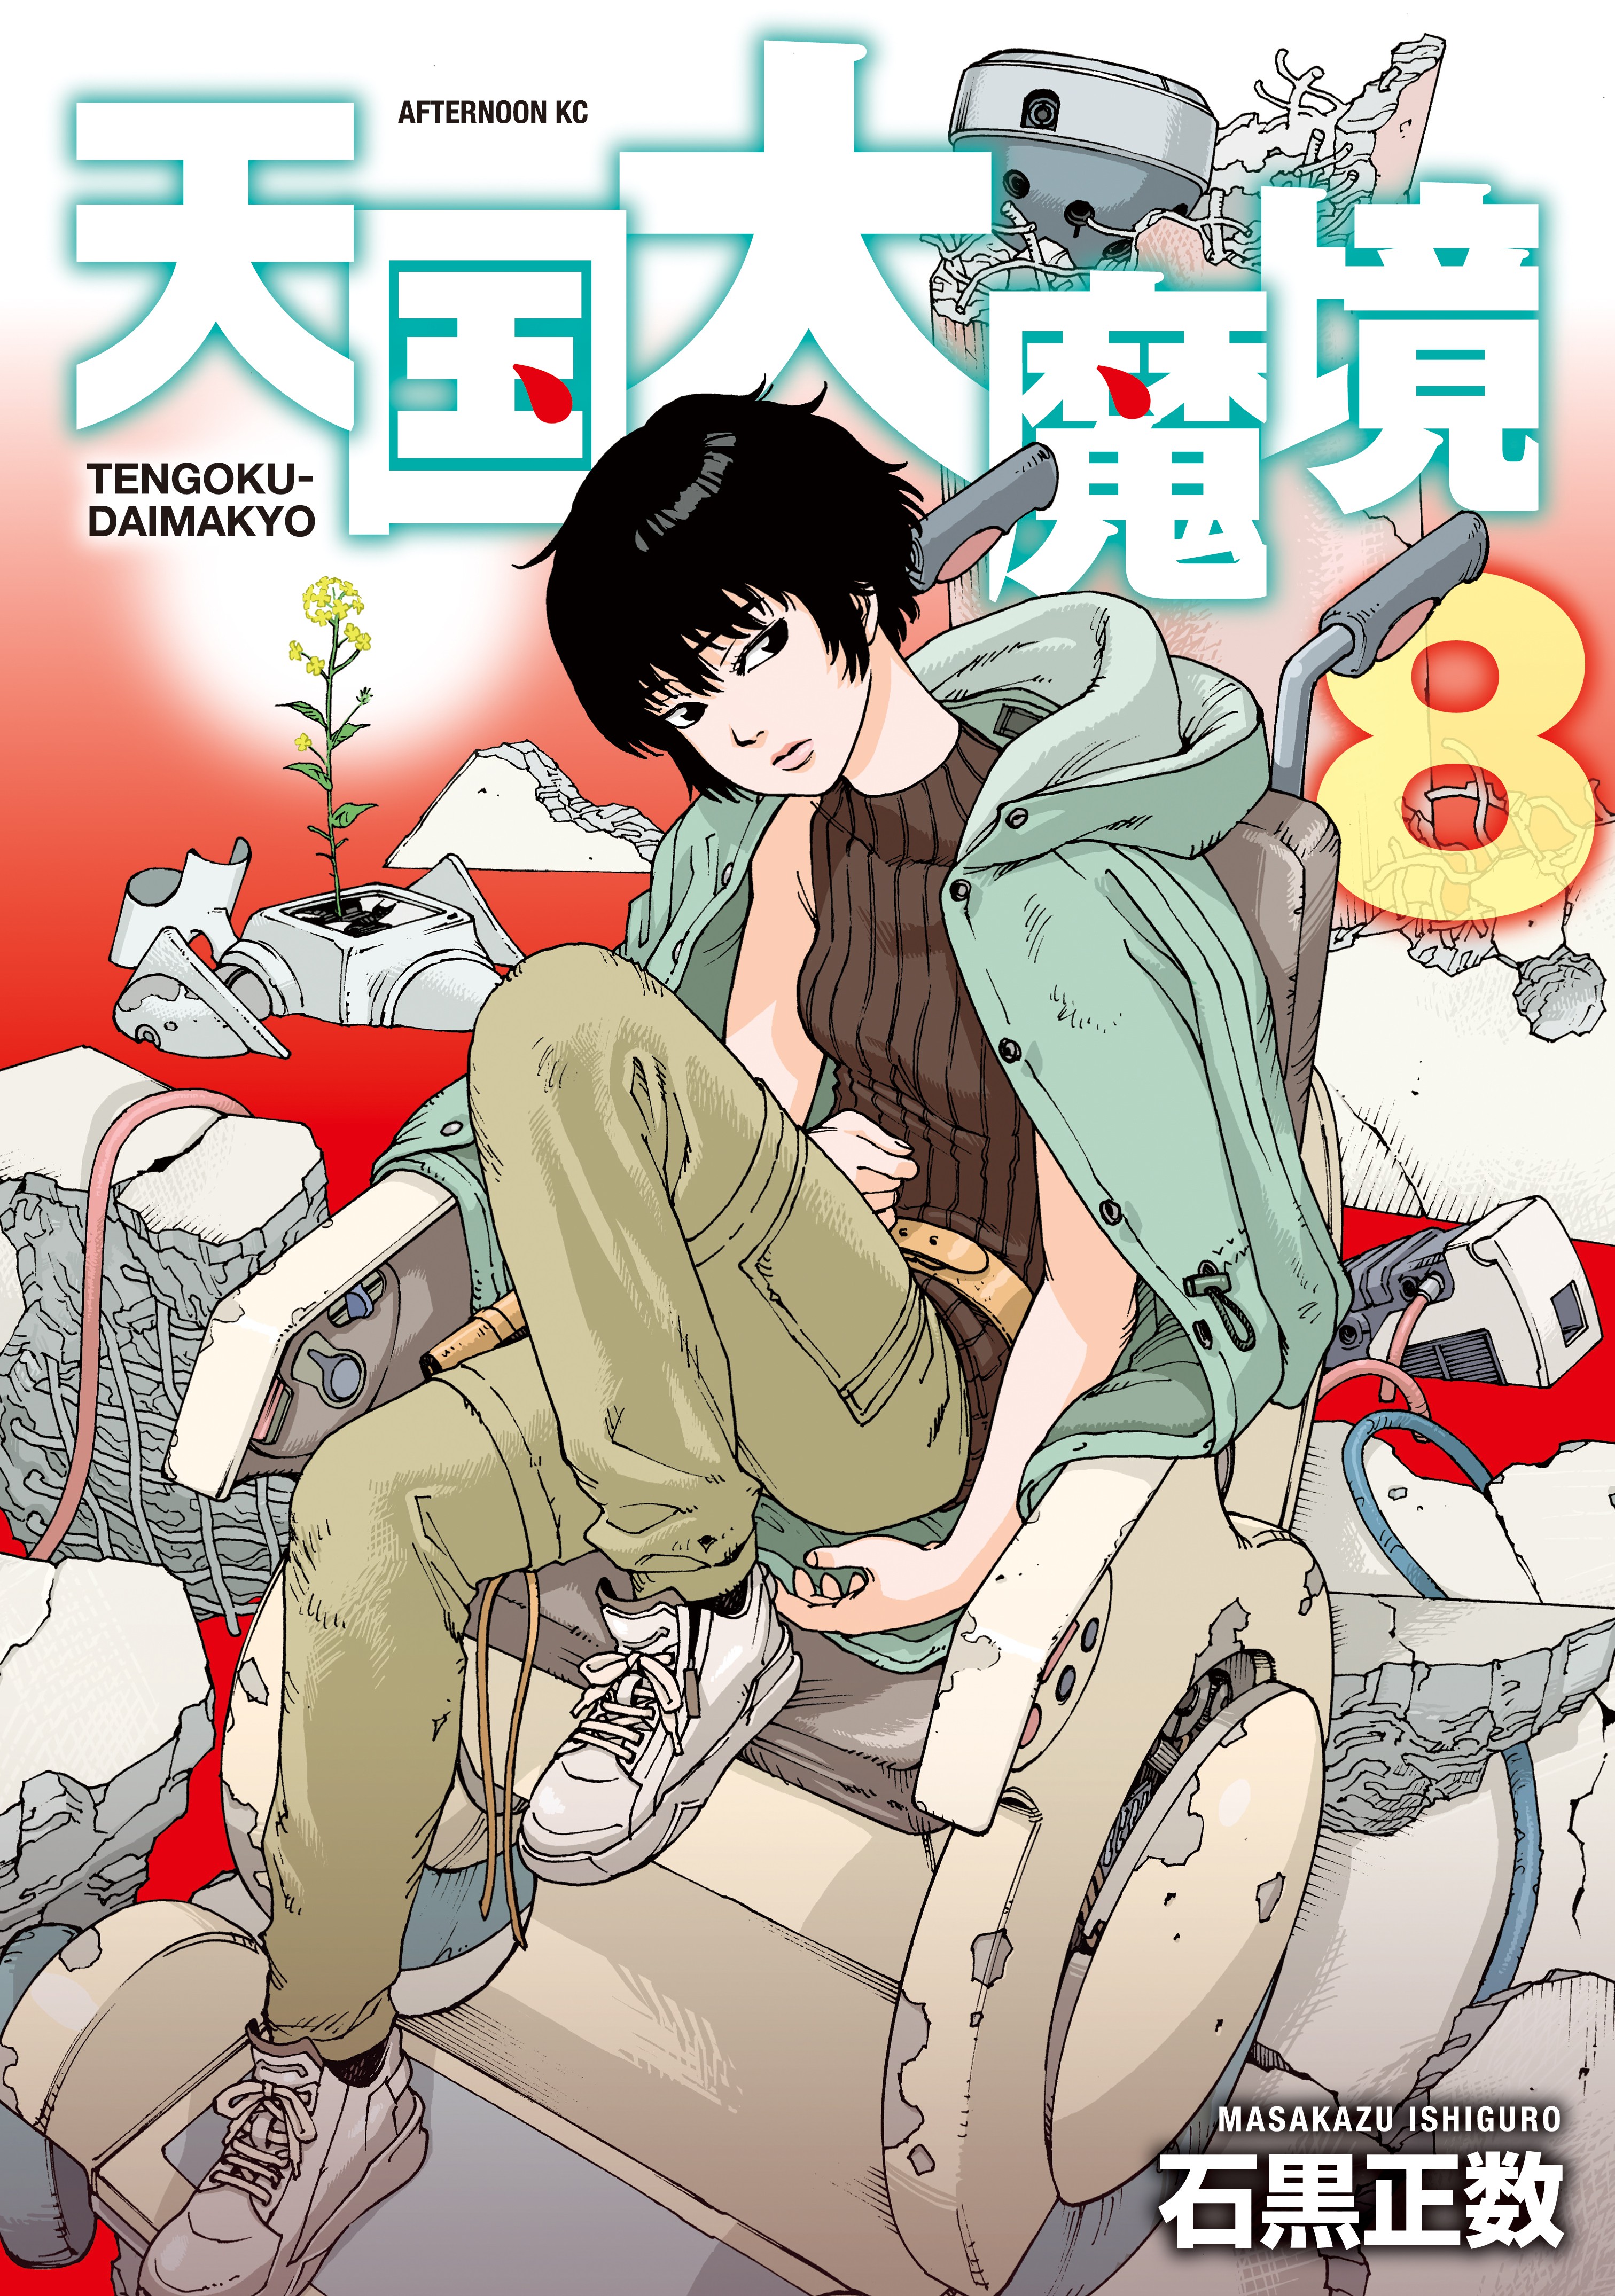 K MANGA on X: NEW: Sci-fi adventure series Heavenly Delusion (Tengoku  Daimakyo) by Masakazu Ishiguro has been added to K MANGA! 👇Read the first  chapter today and earn 5pts!  💡Read many